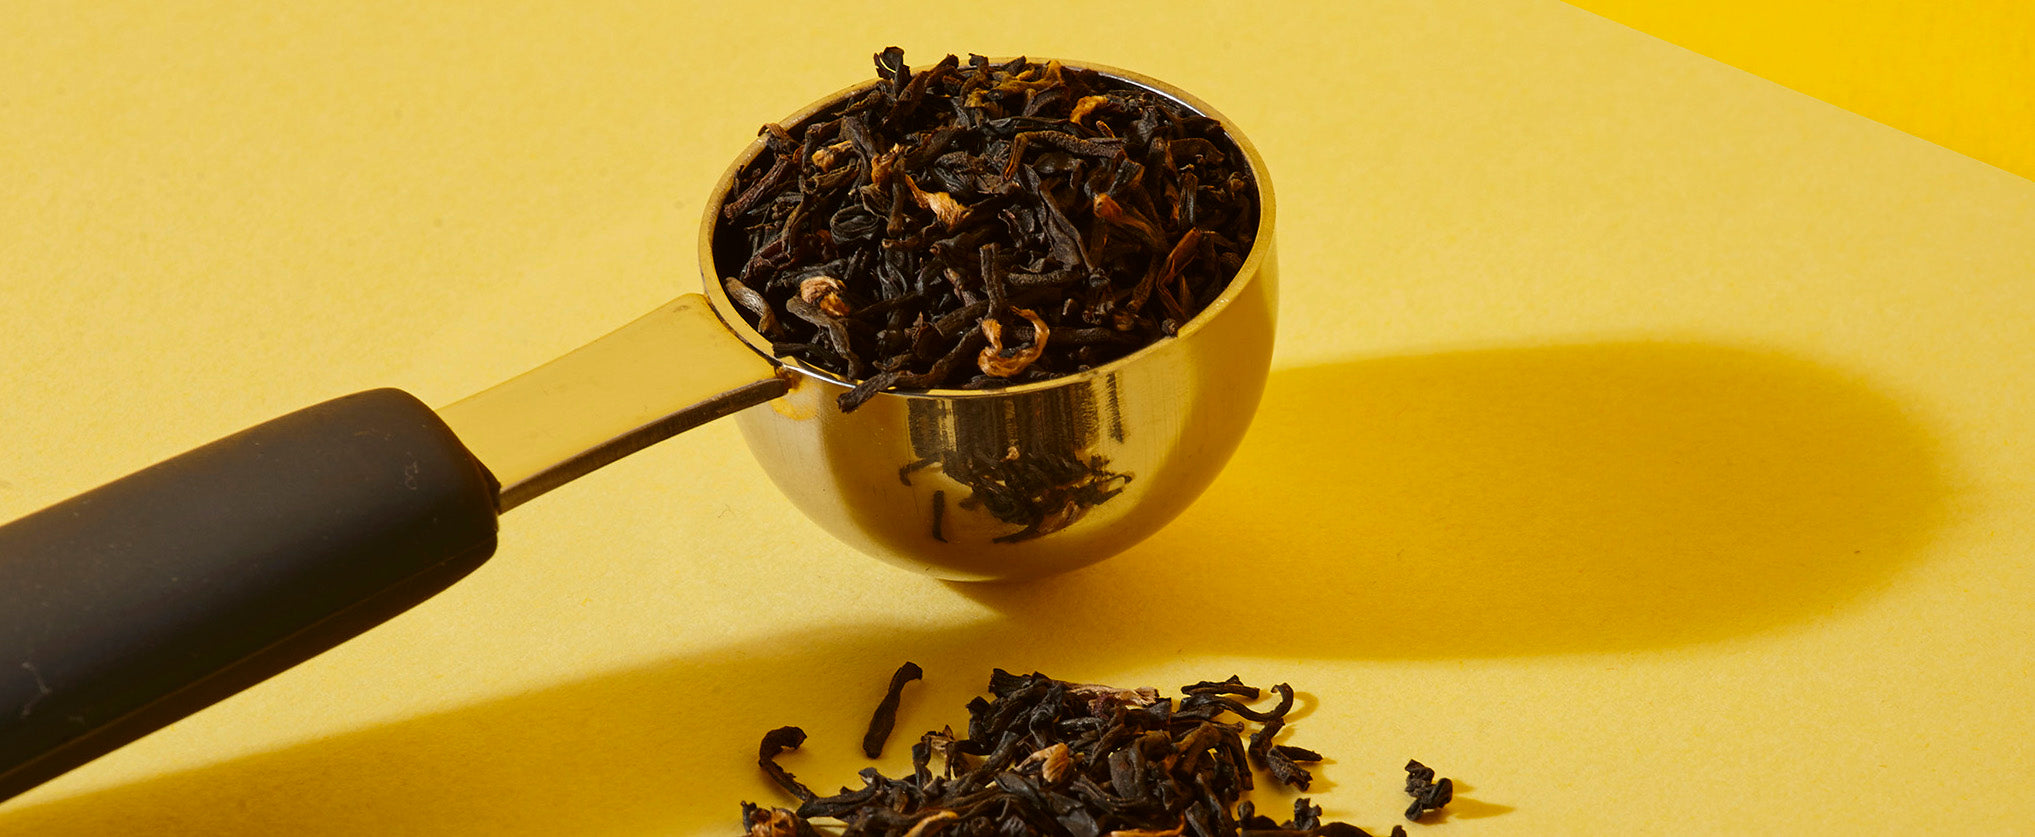 How To Brew Loose Leaf Tea - The Best Tea You Will Ever Have